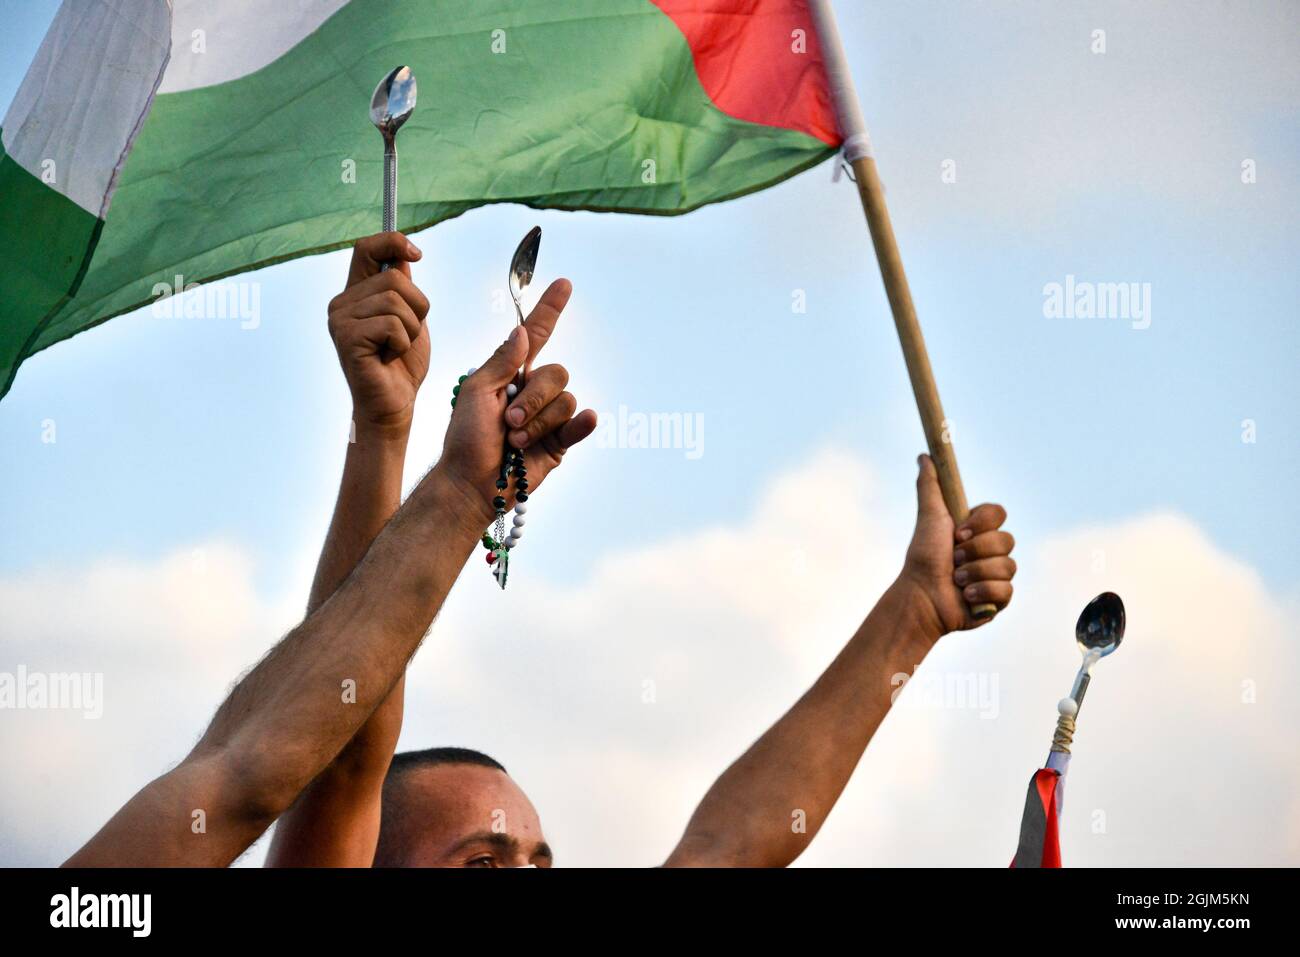 Palestine. 10th Sep, 2021. Arab Israeli protestors waving Palestine flags and spoons, which were used for the escape of the six Palestinian prisoners from the Gilboa Prison this week. The protest in Umm al-Fahm today condemned punishment measures taken after the jailbreak by the Israeli Prison Services and against violent interrogation means. According to some statistics, one out of five Palestinian men was imprisoned in Israeli jails during his lifetime. Umm al-Fahm, Israel, on Sep 11th 2021.  (Photo by Matan Golan/Alamy Live News) Credit: Matan Golan/Alamy Live News Stock Photo